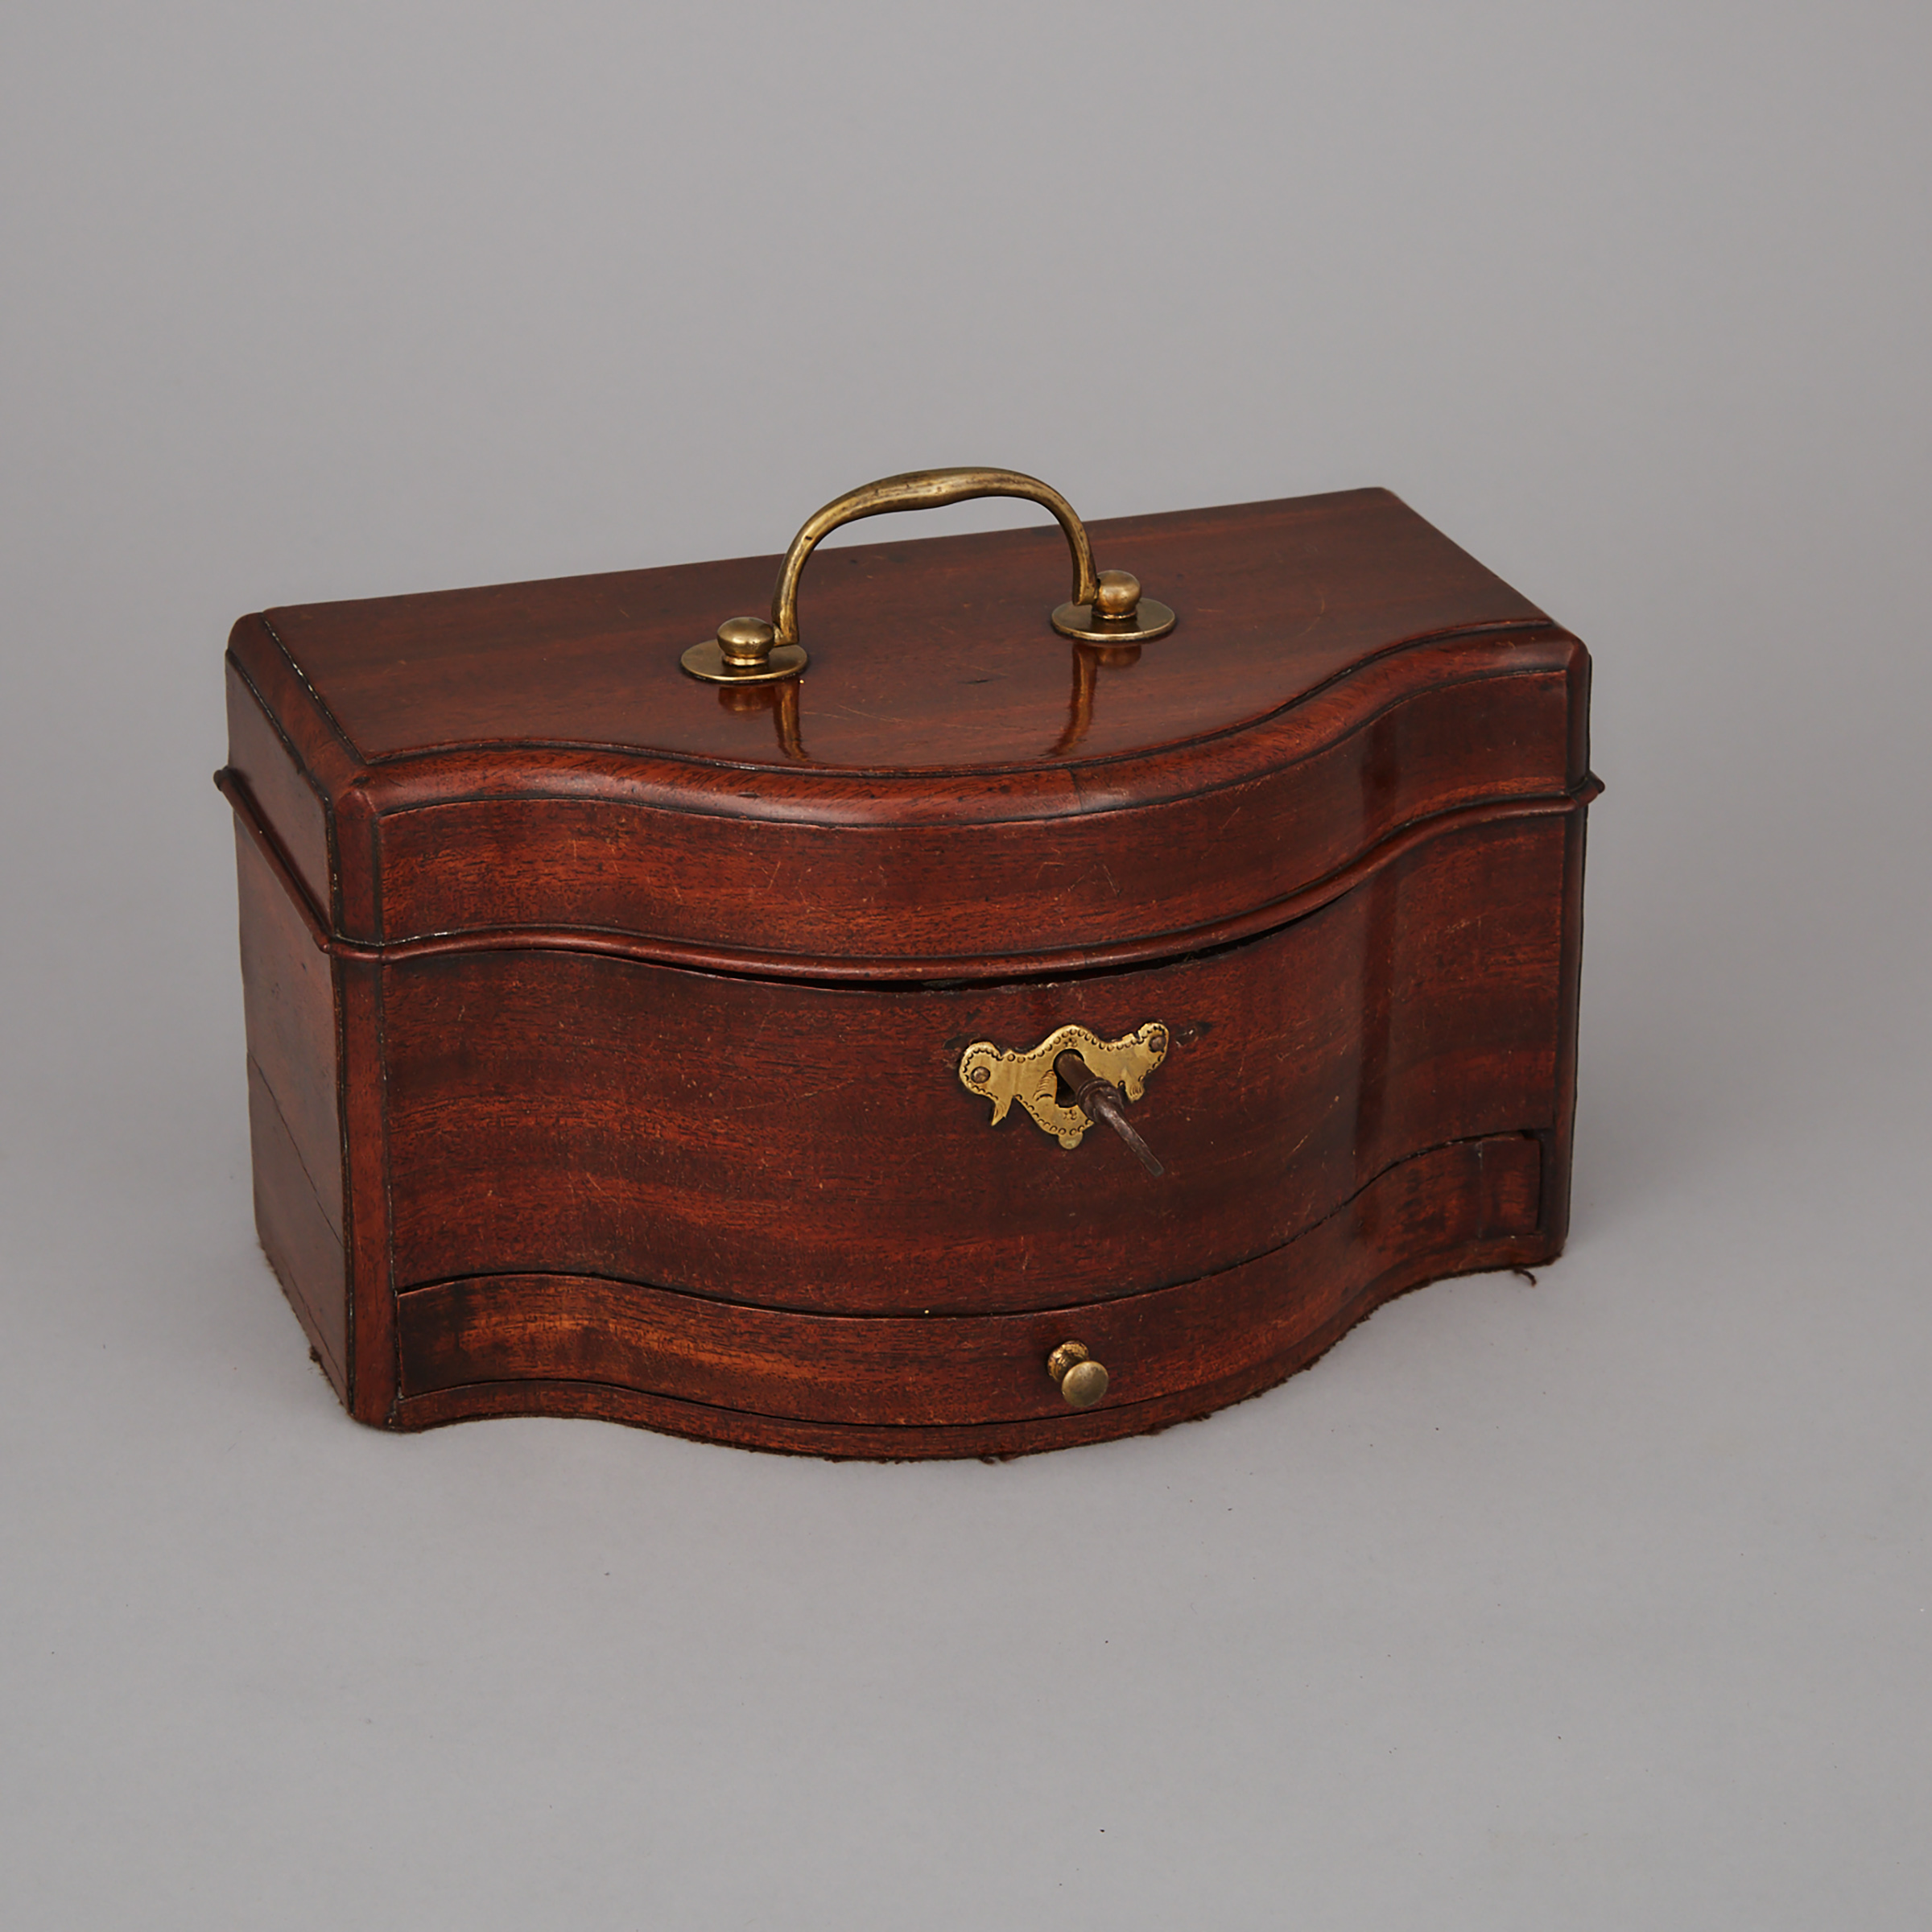 Dutch Mahogany Serpentine Front Tea Caddy, early 19th cent